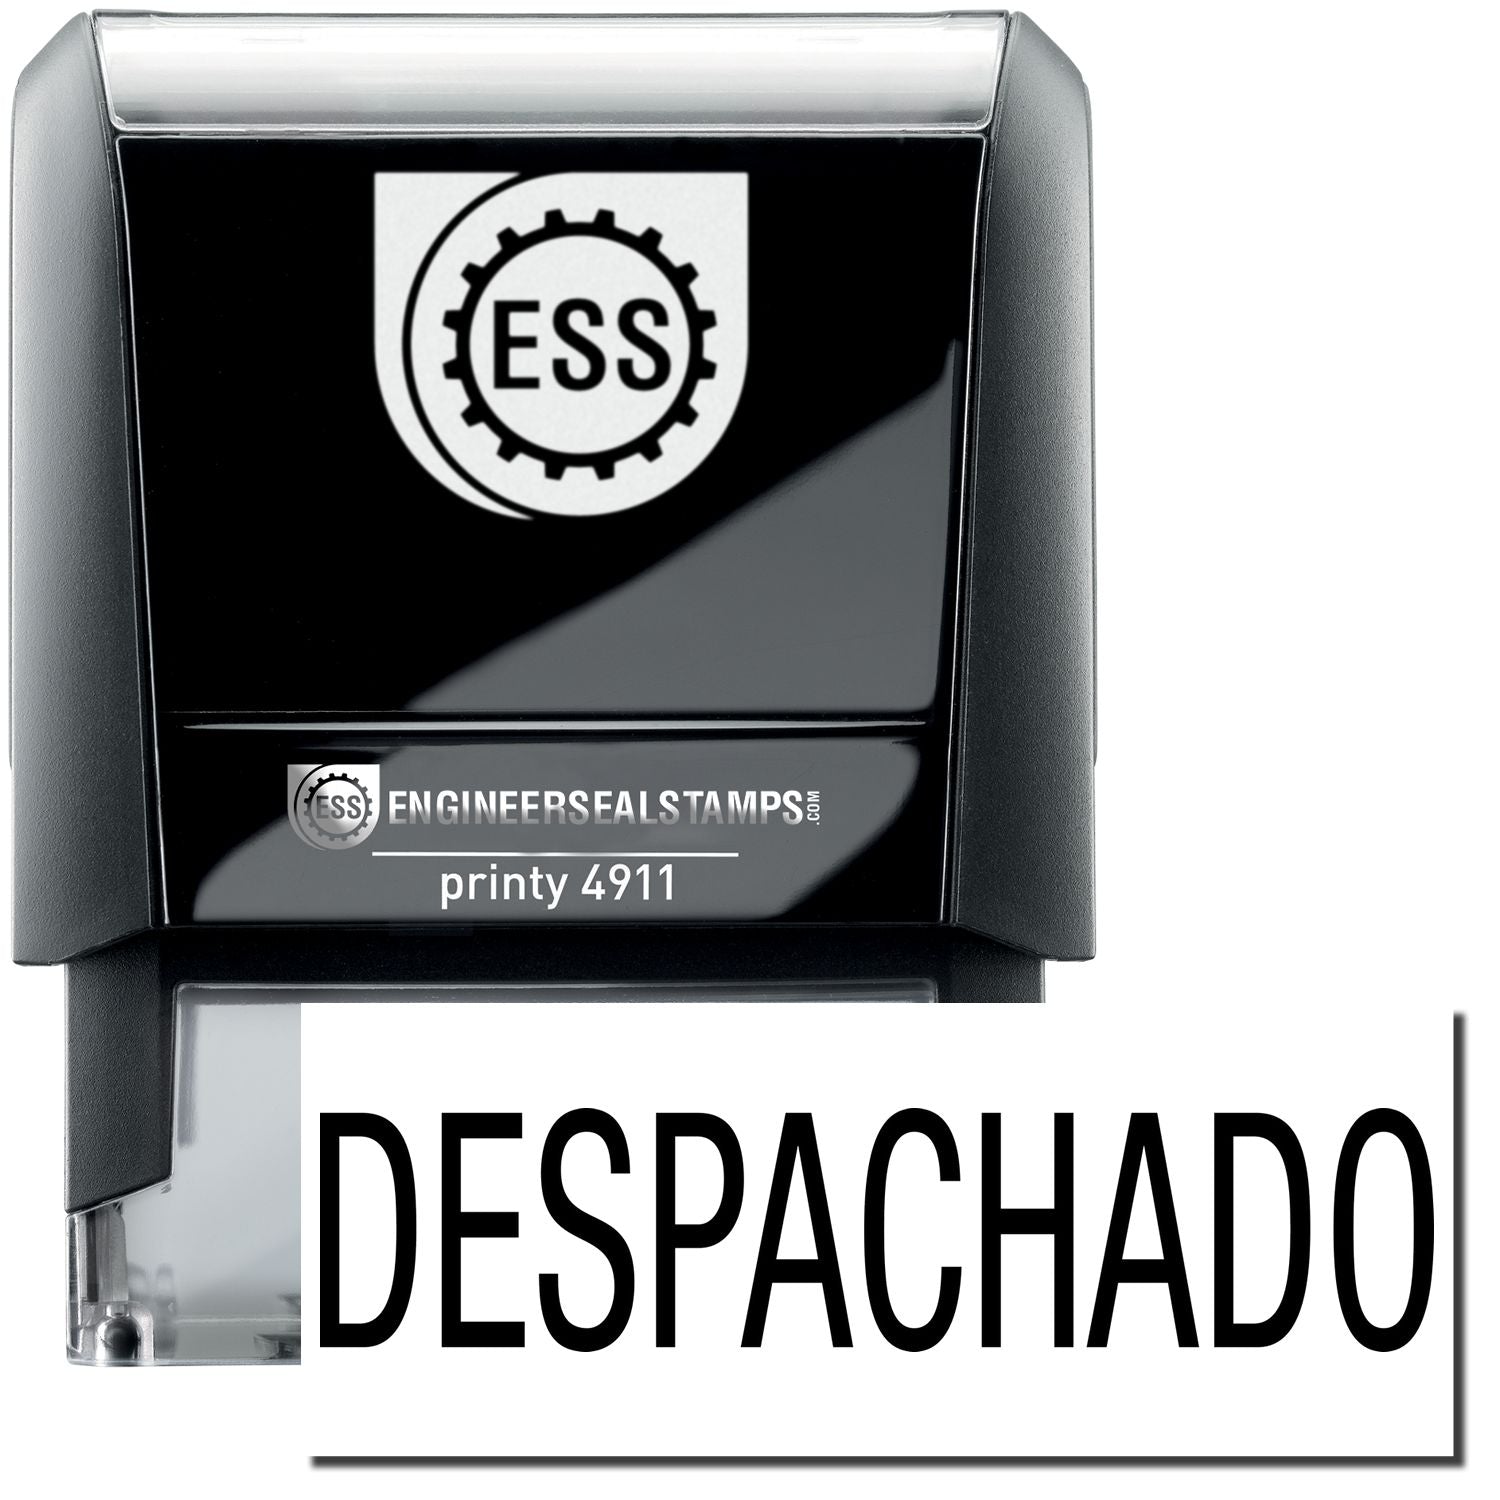 A self-inking stamp with a stamped image showing how the text "DESPACHADO" is displayed after stamping.